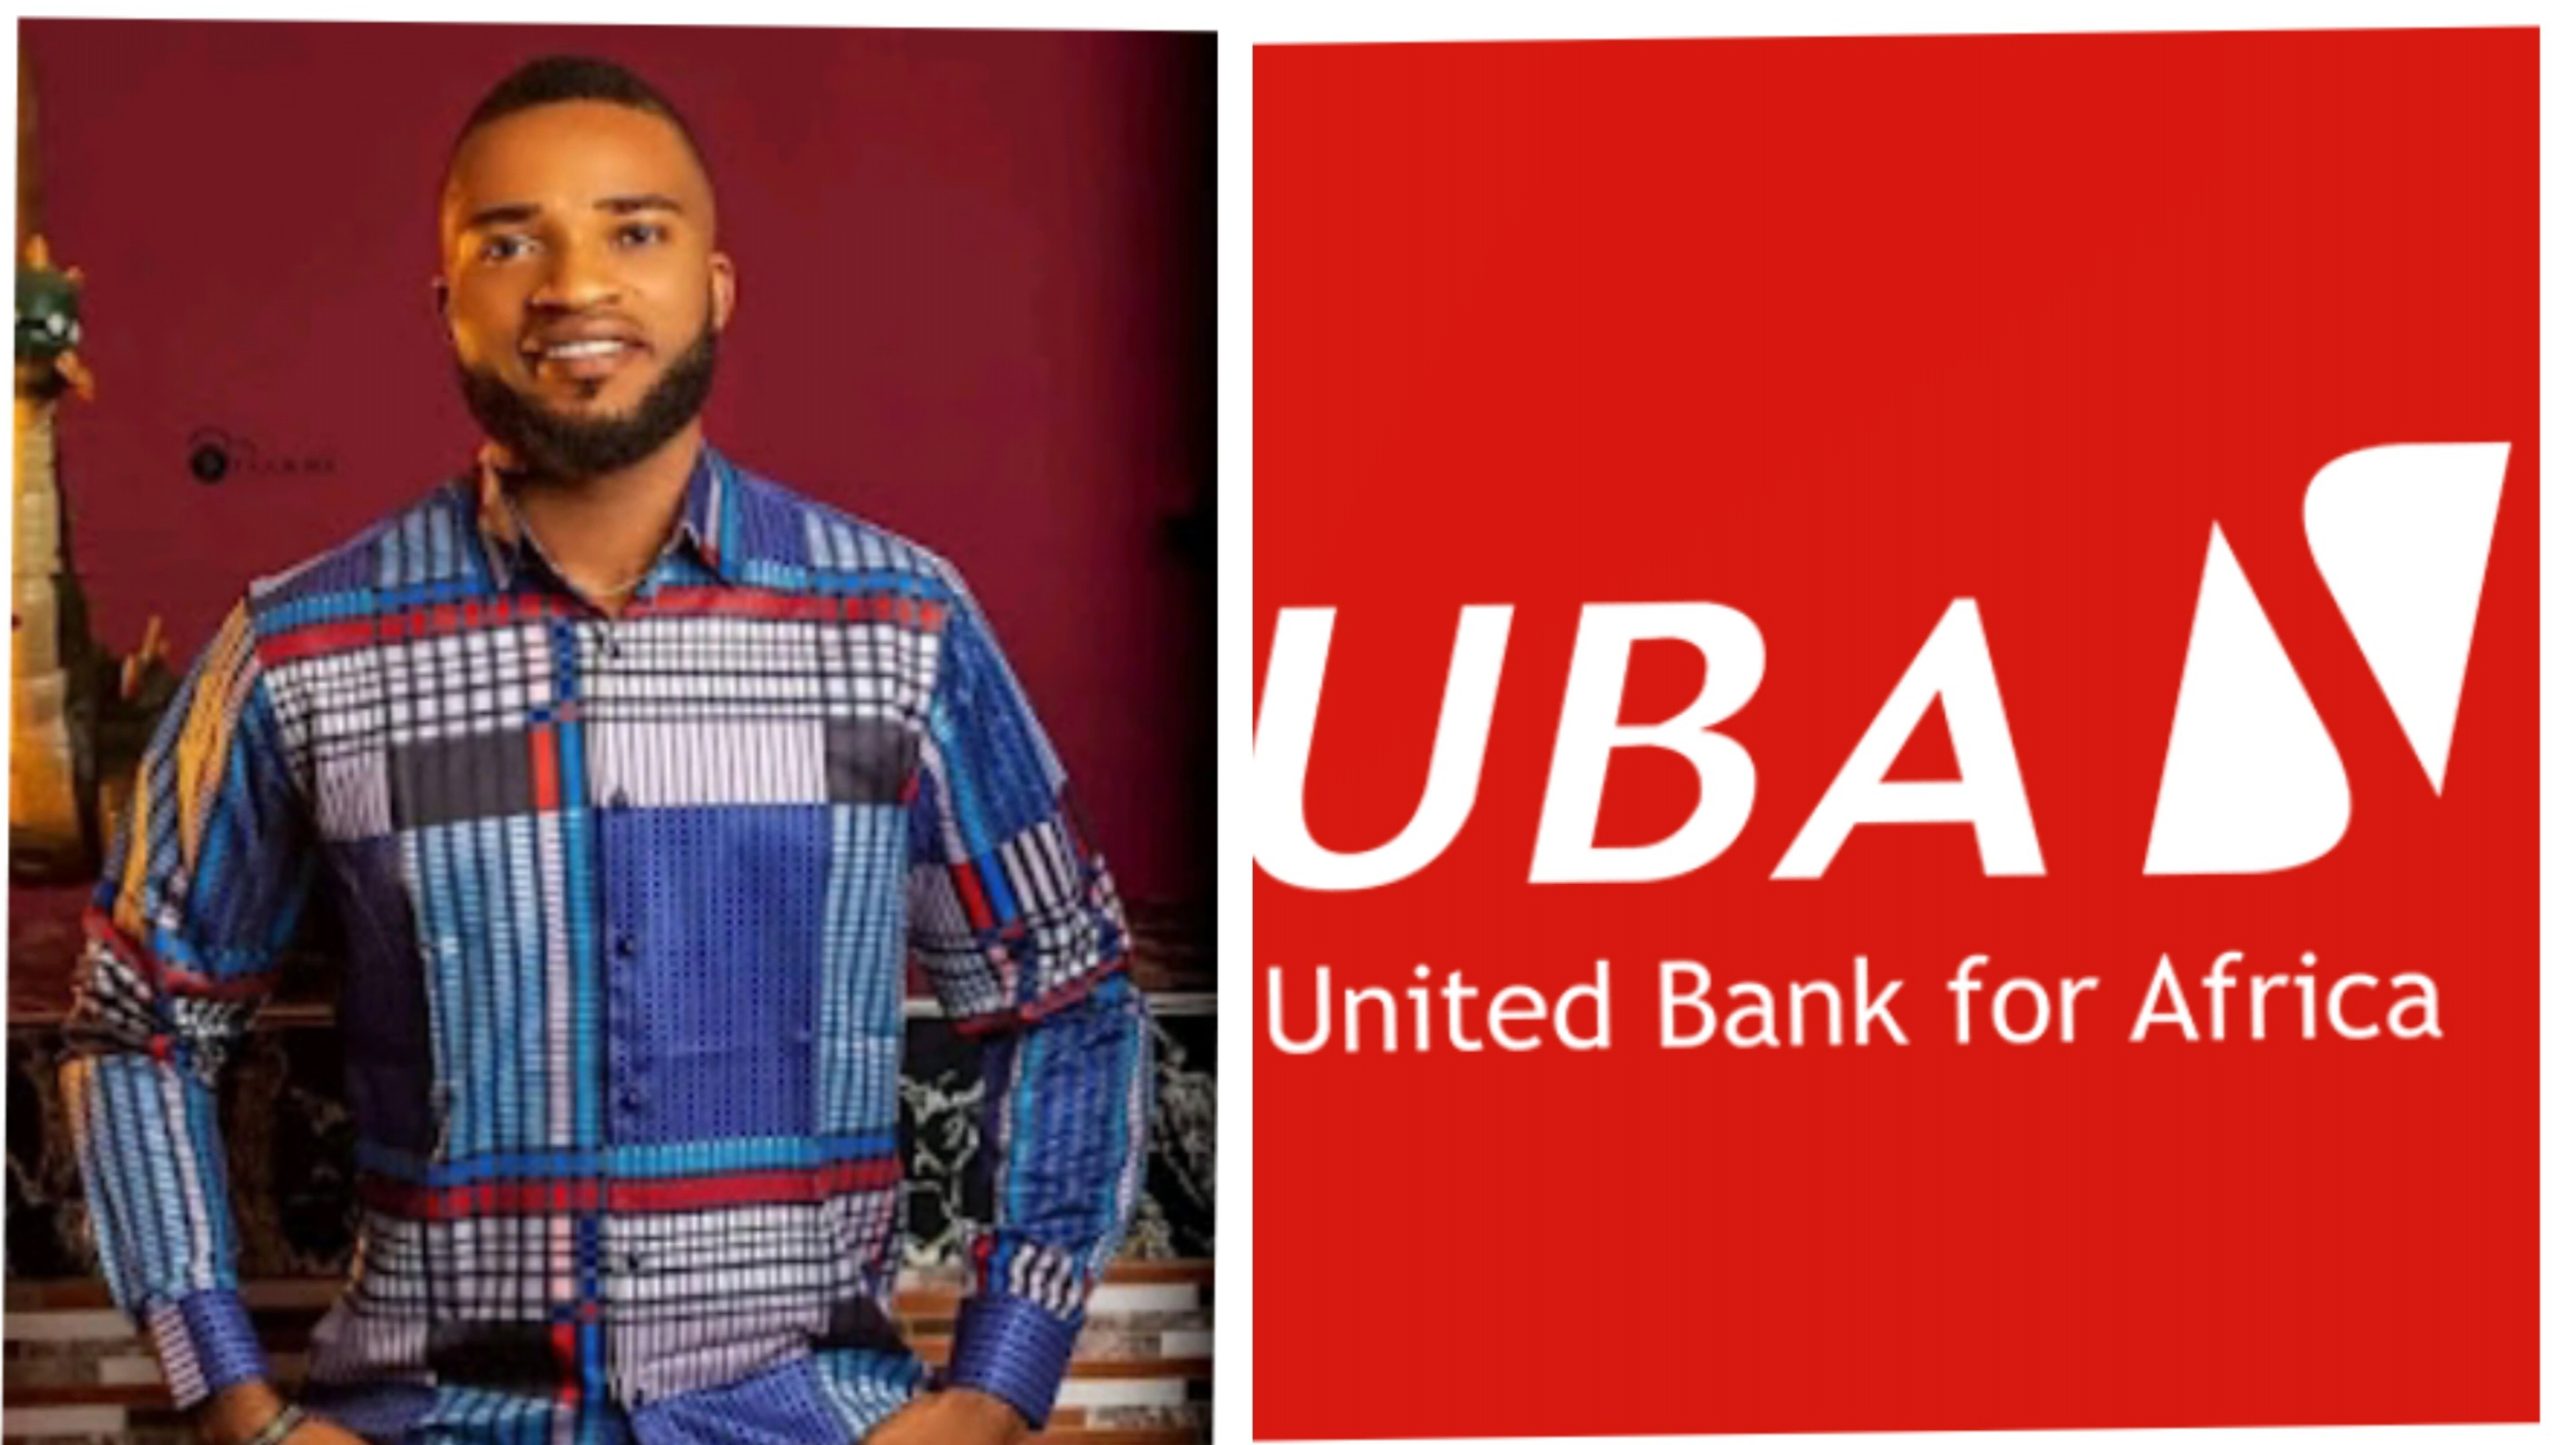 EXCLUSIVE: See “Emmanuel Uche-Best”, Fresh Graduate Staff Of UBA Murdered In Cold Blood In Bank Robbery Incident In Otukpo, Benue State (VIDEO)